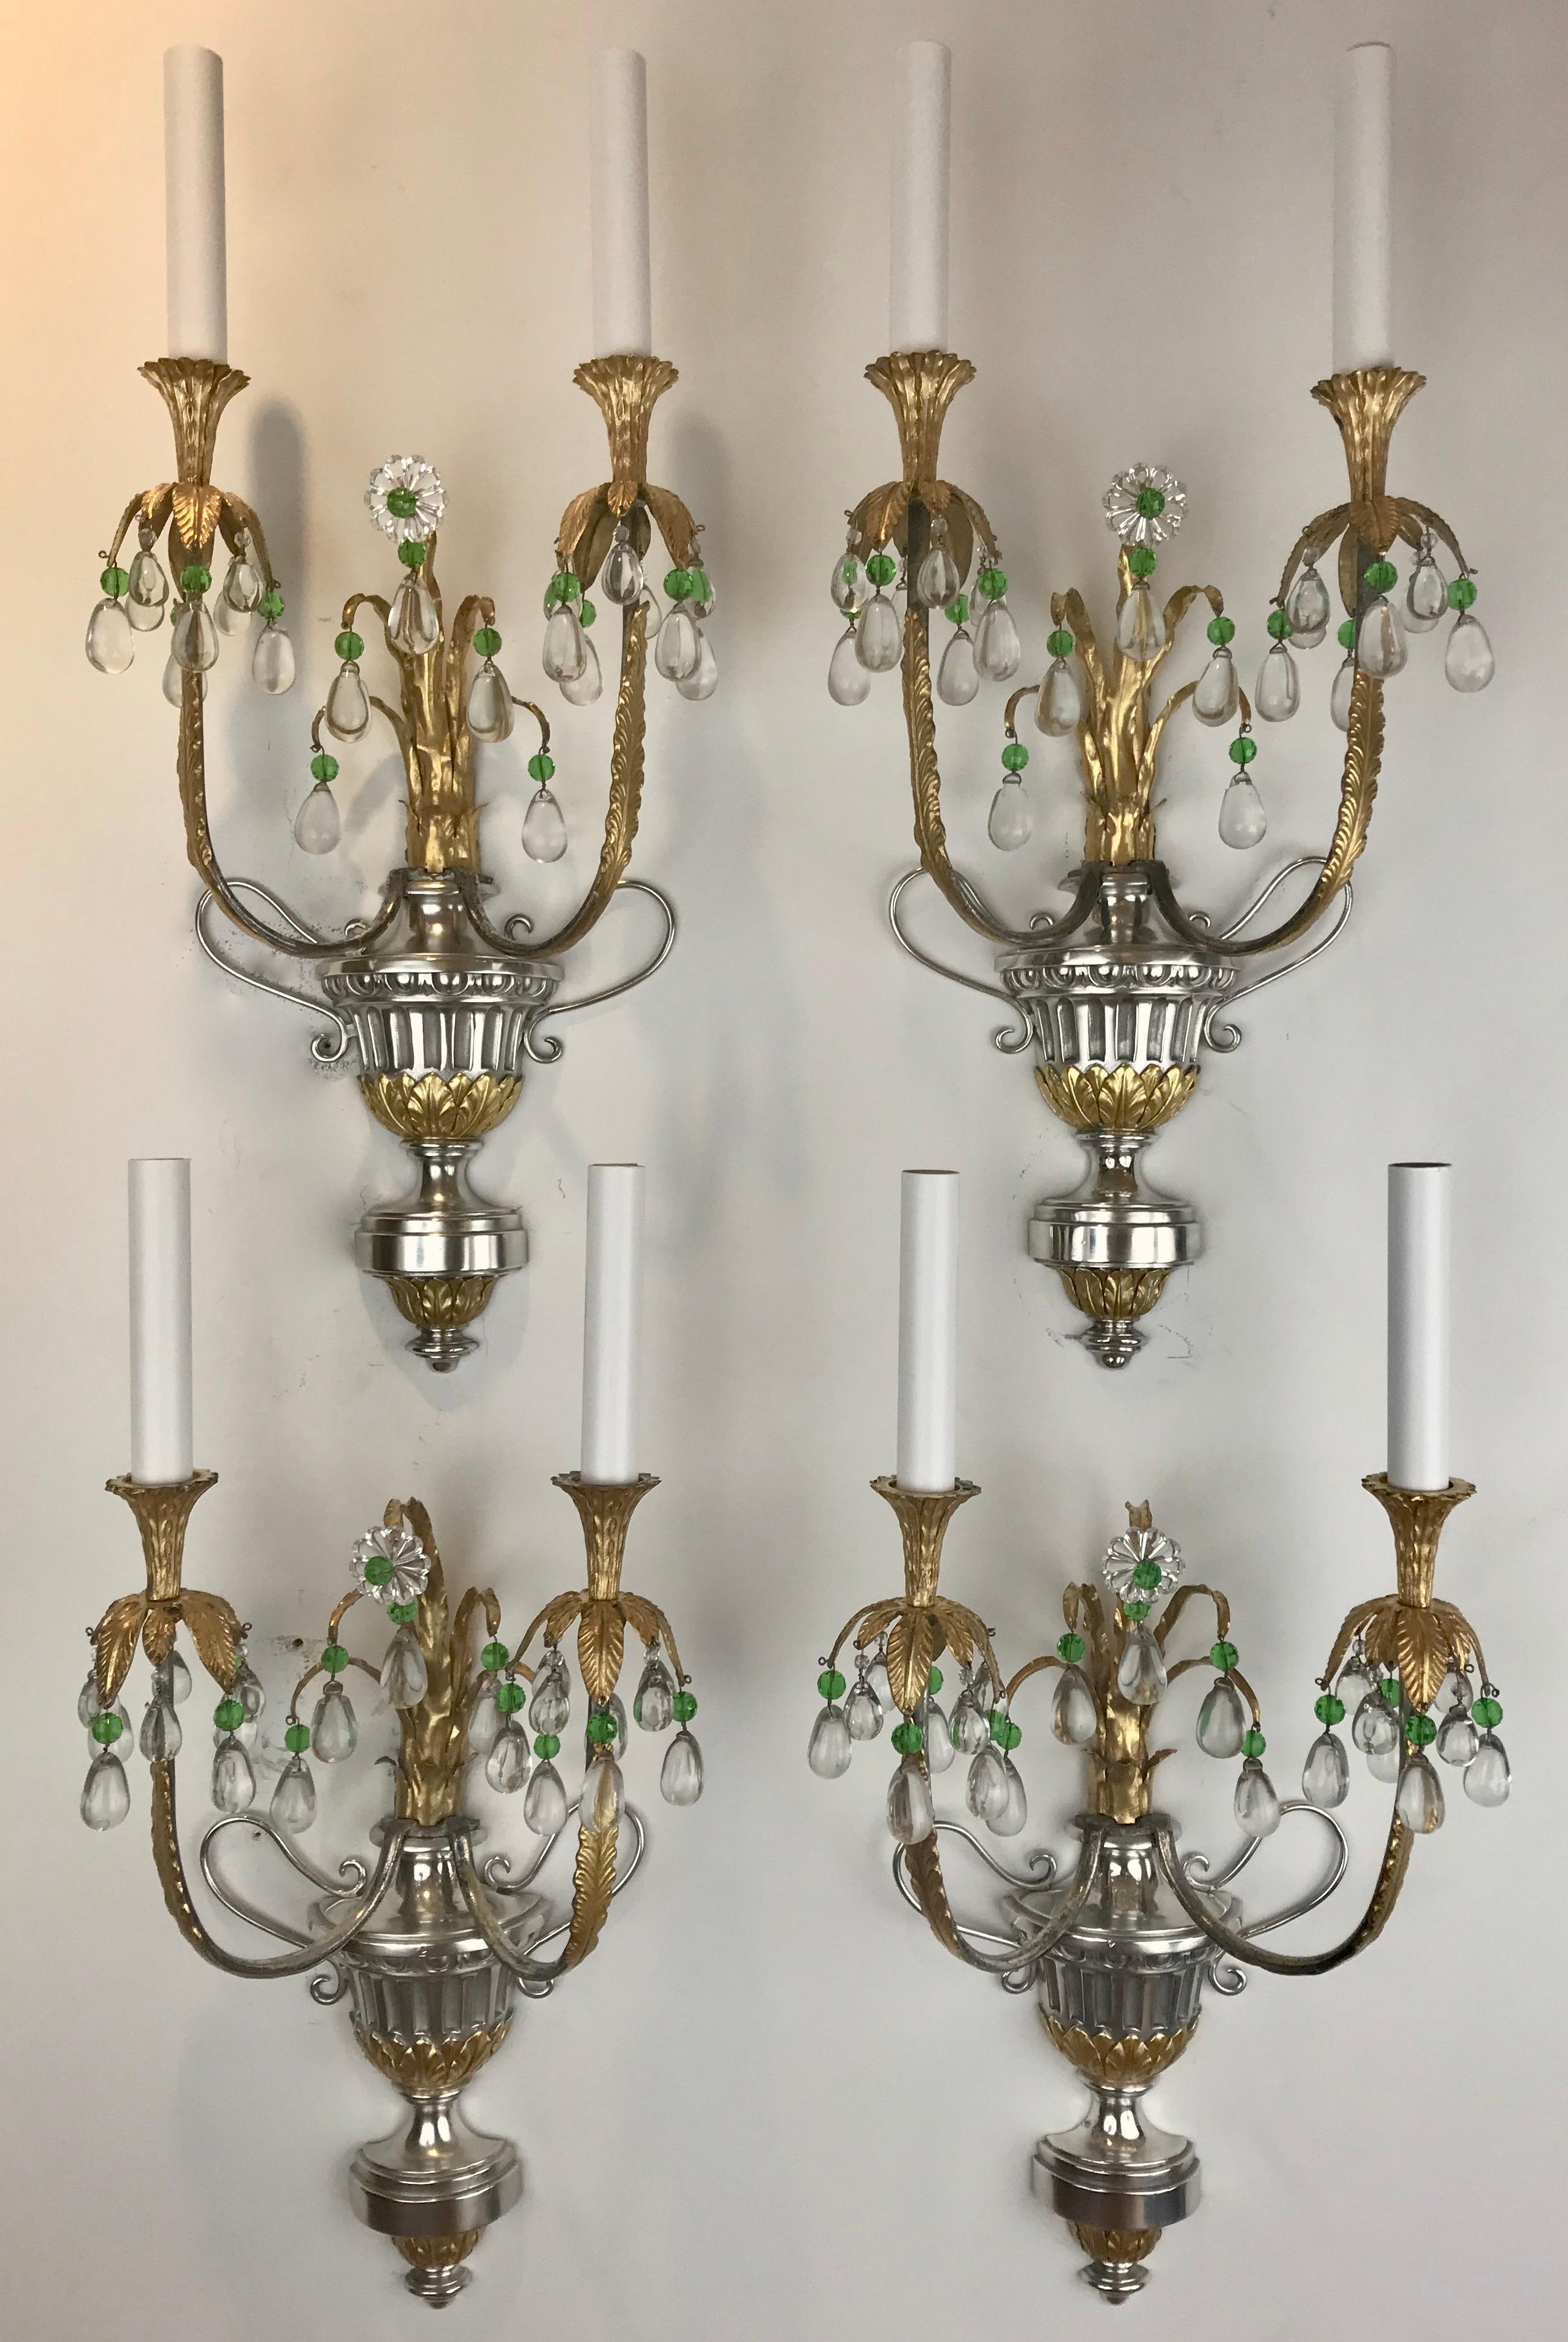  Four Silver and Gilt Bronze Sconces with Green Crystal Accents by Caldwell For Sale 1